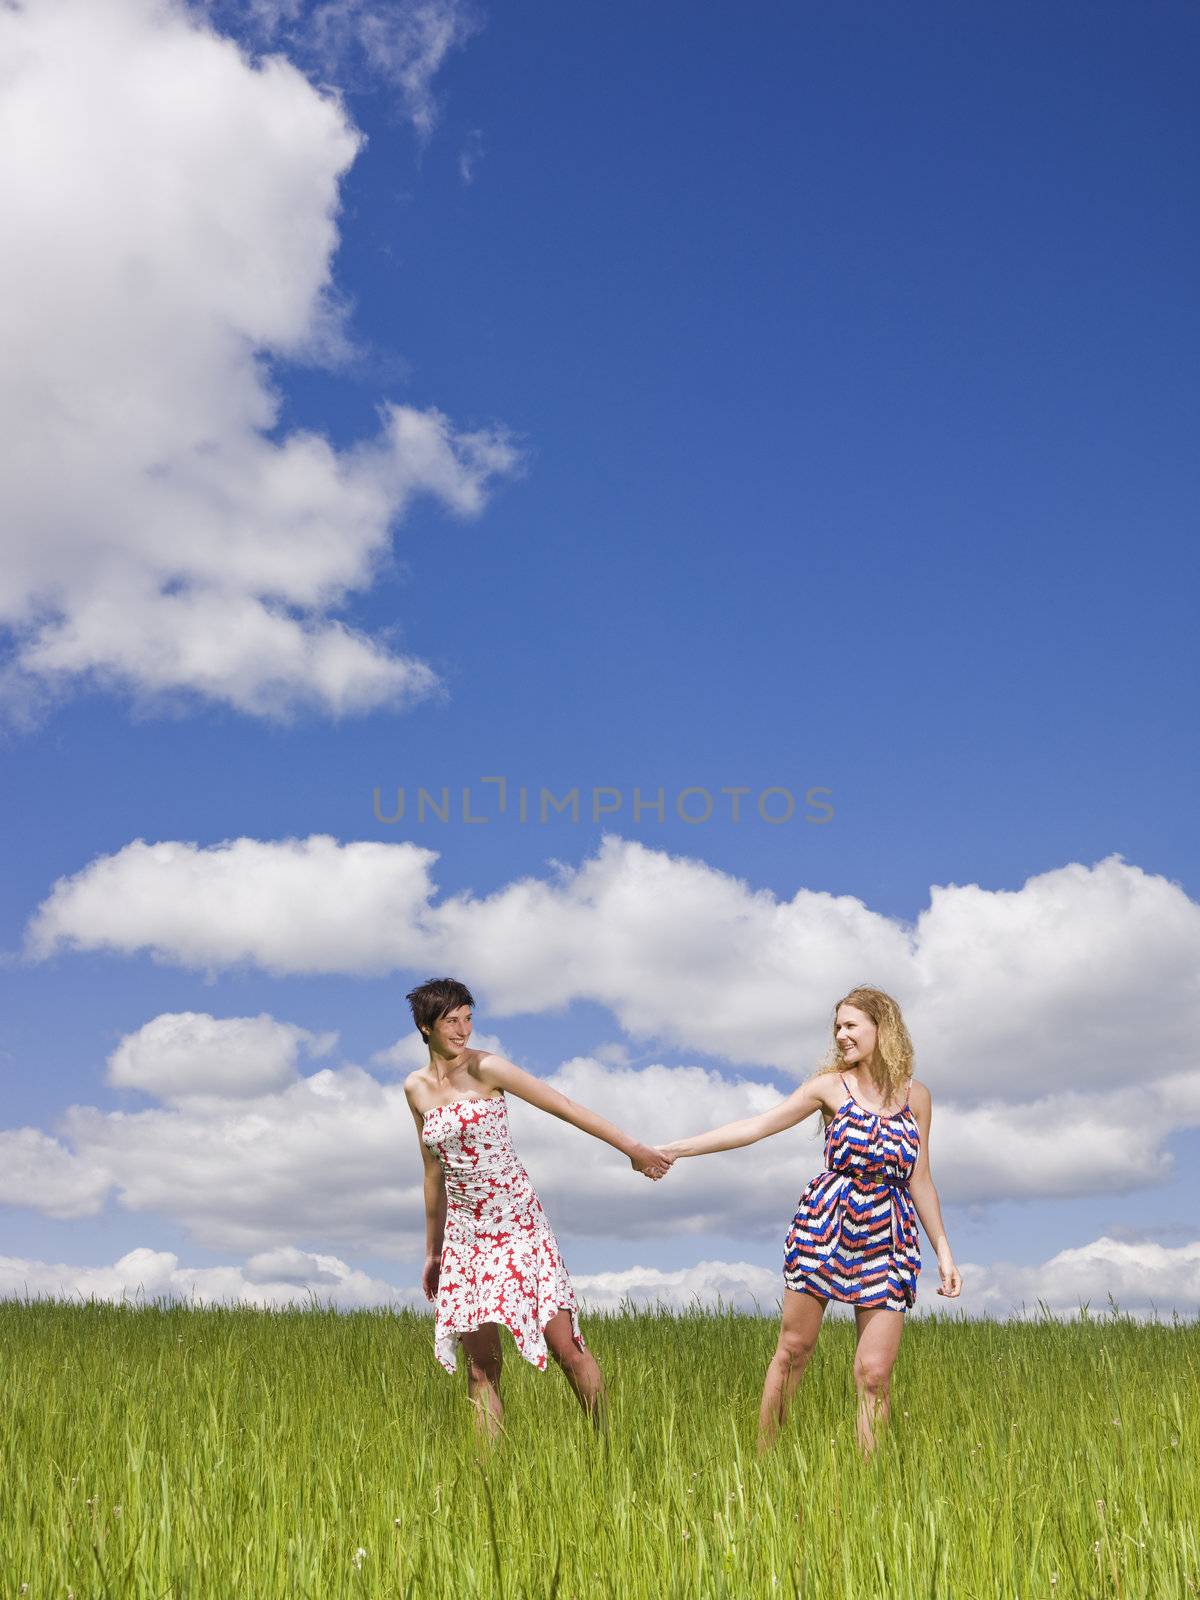 Two women holding hands on a field by gemenacom